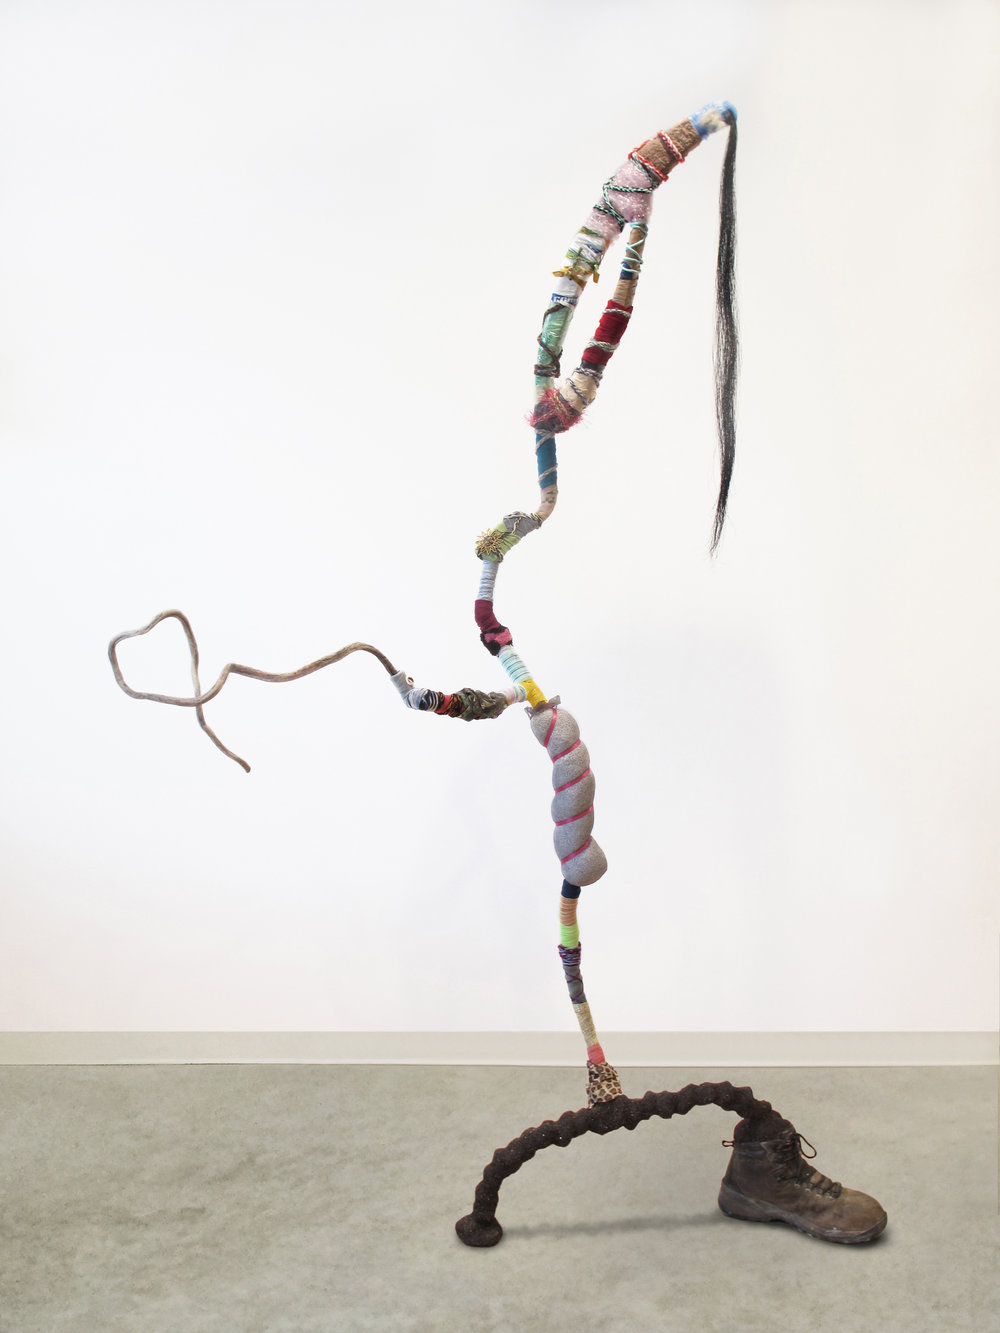  Gina Herrera, A Salutation to All , Assorted found materials, 77 x 50 x 19 inches "Reclaimed natural and man-made waste take on a humanoid shape, down to the wide-legged stance featuring an abandoned work boot. A twisting stick appendage extends in greeting, seeks acknowledgement." 